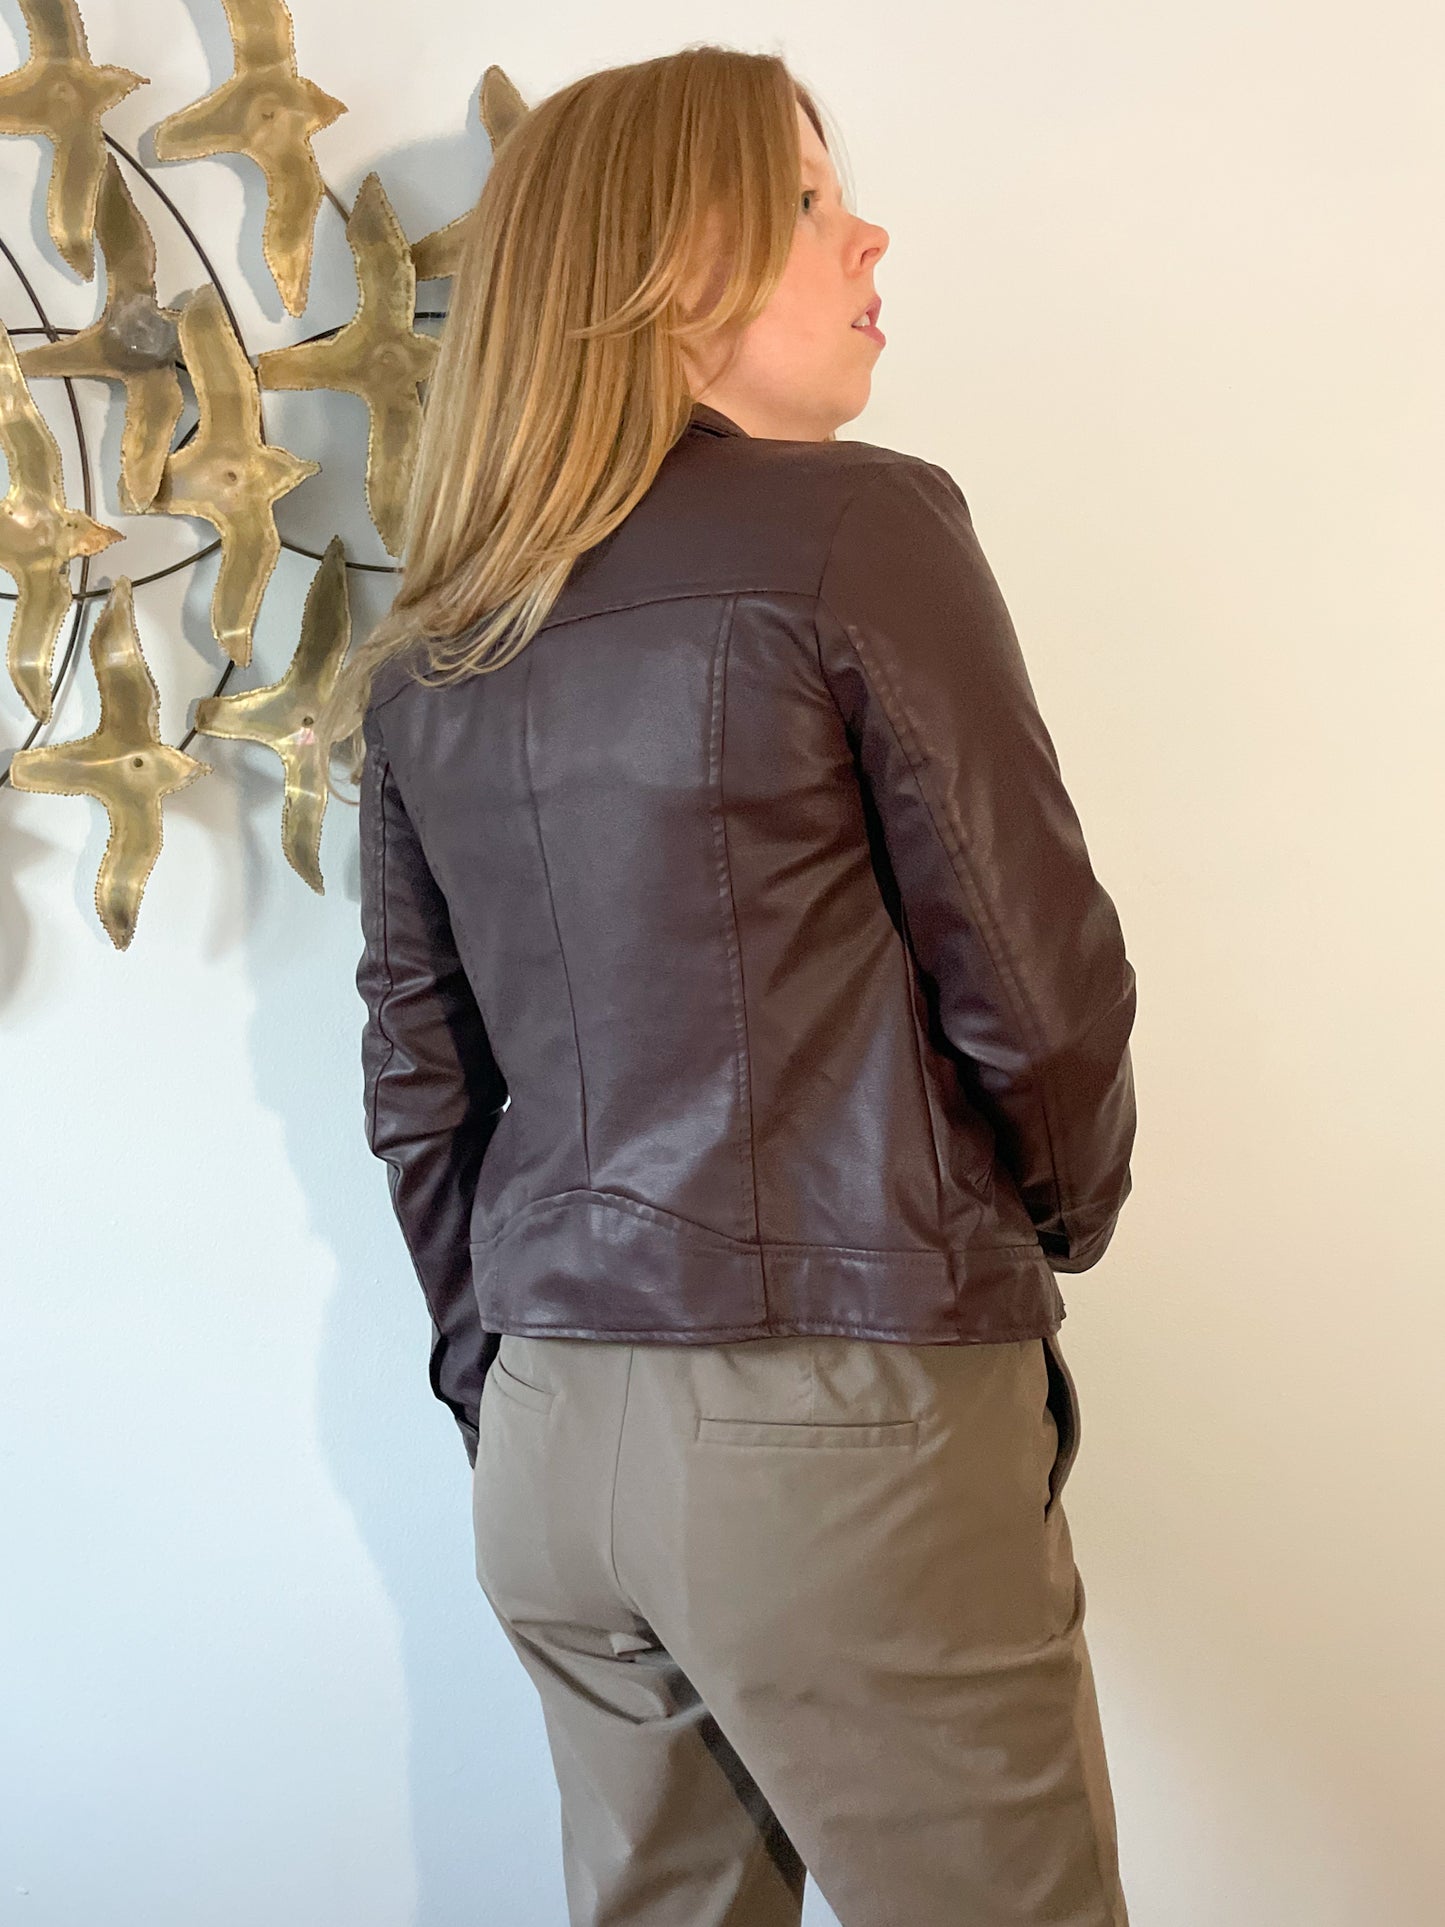 New Look Berry Brown Vegan Leather Moto Jacket - Small